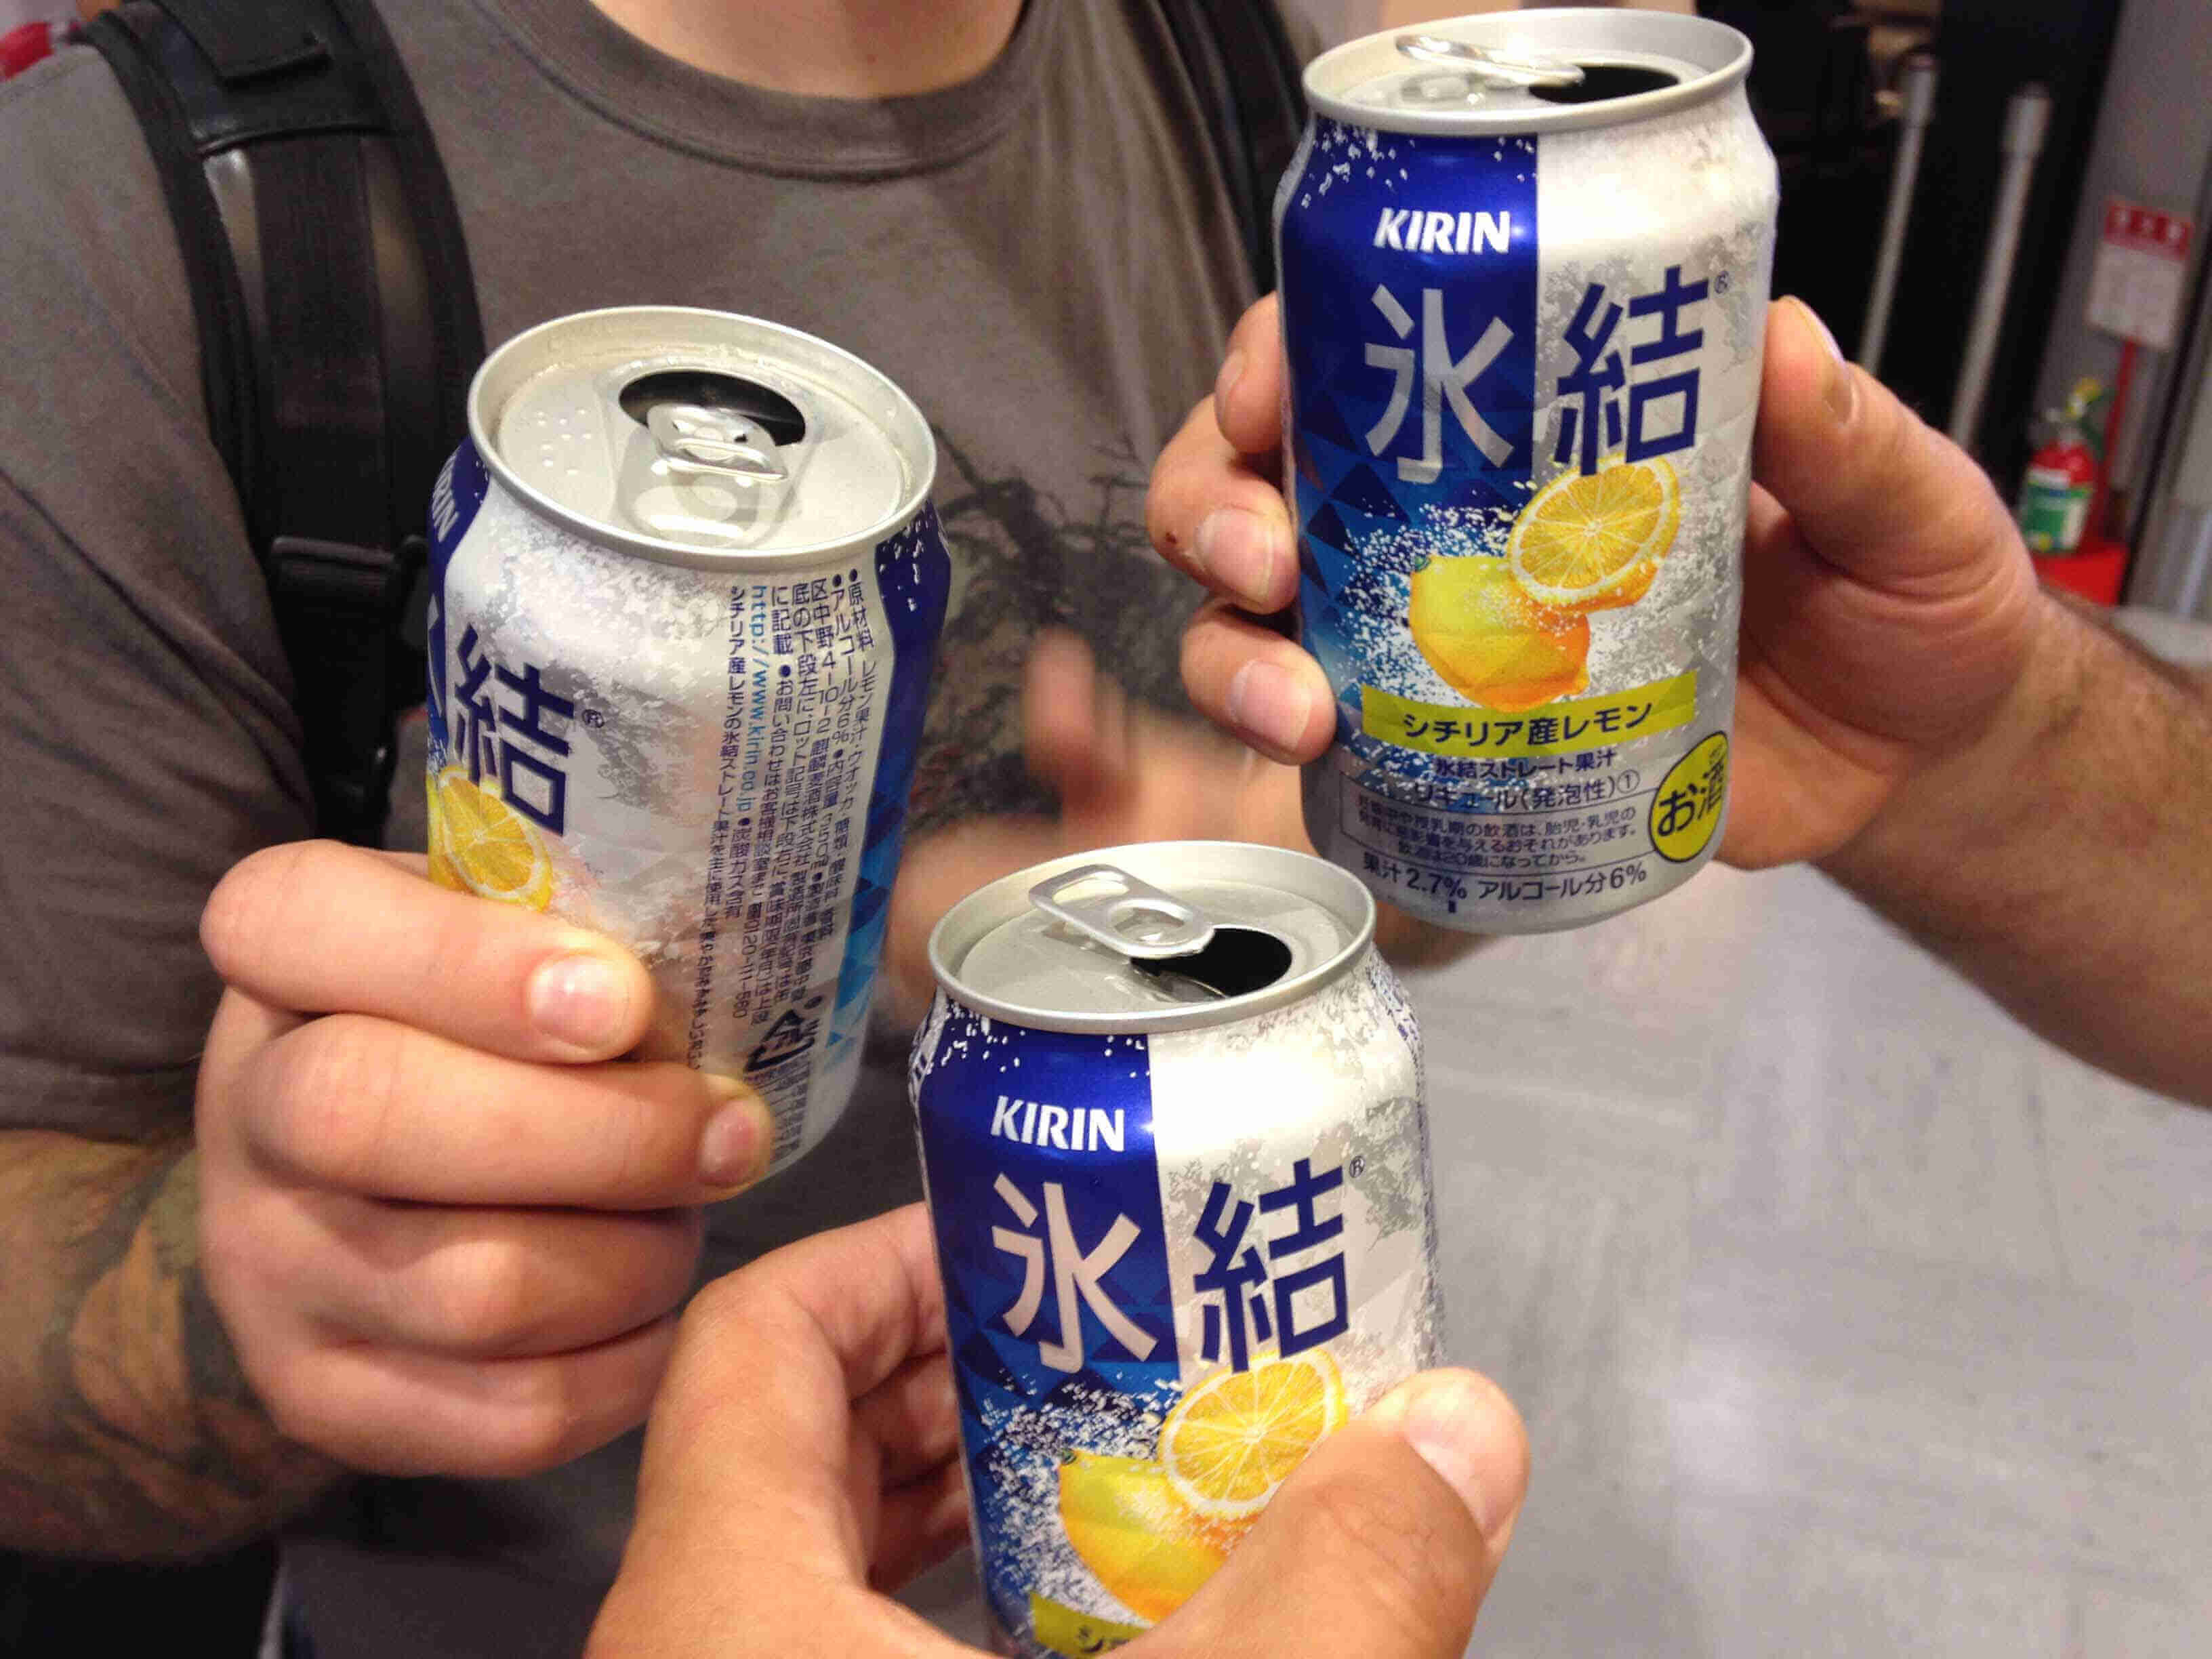 Three hands holding up 3 beverage cans with lemons and Japanese text on them